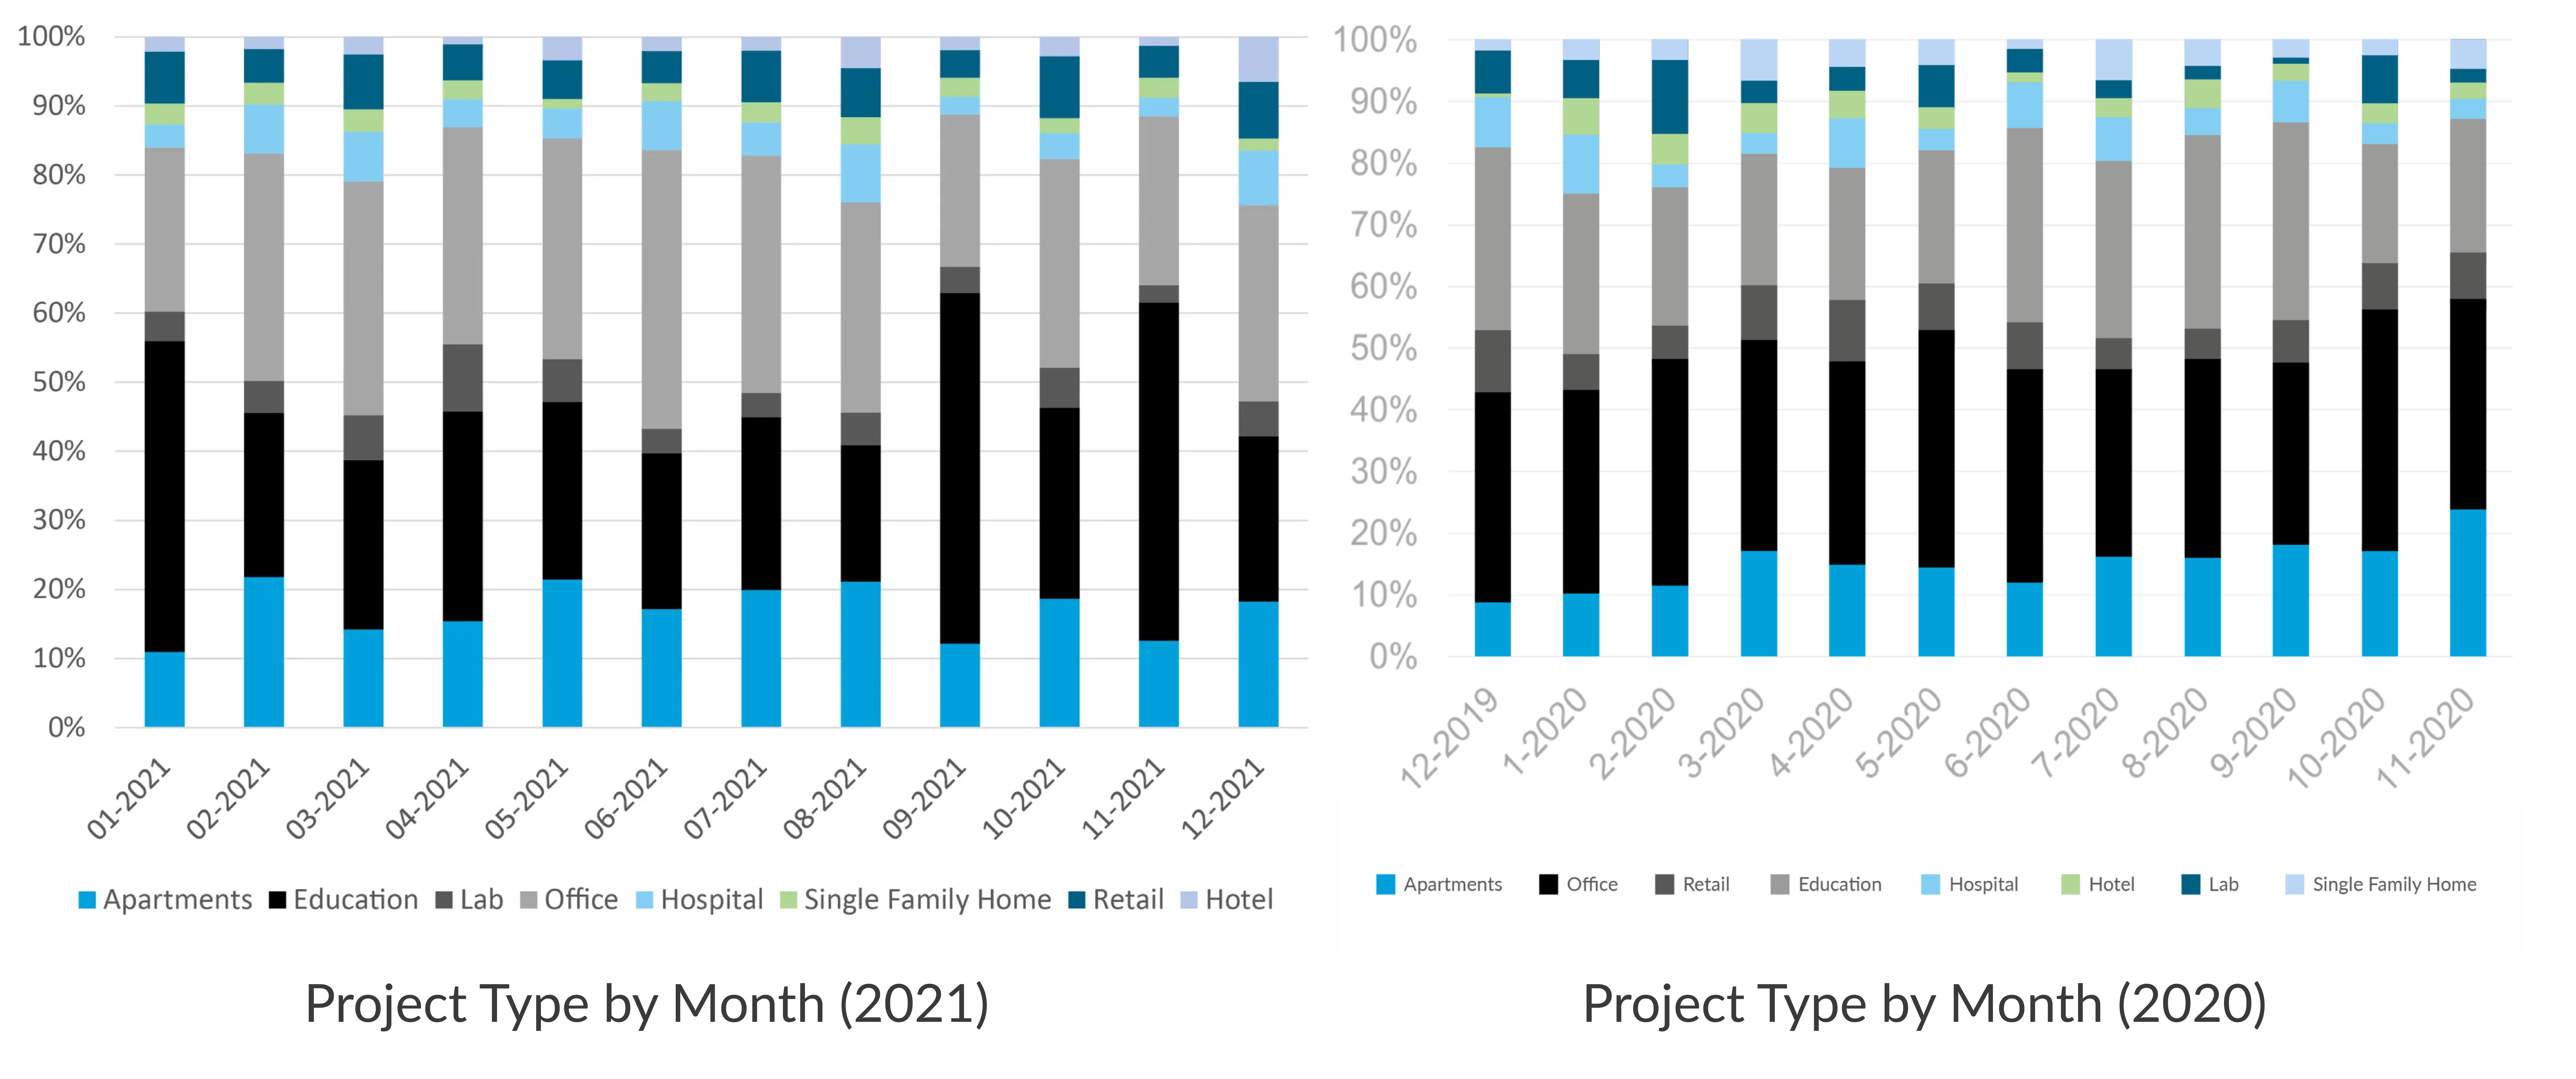 Project types by month 2021 and 2020